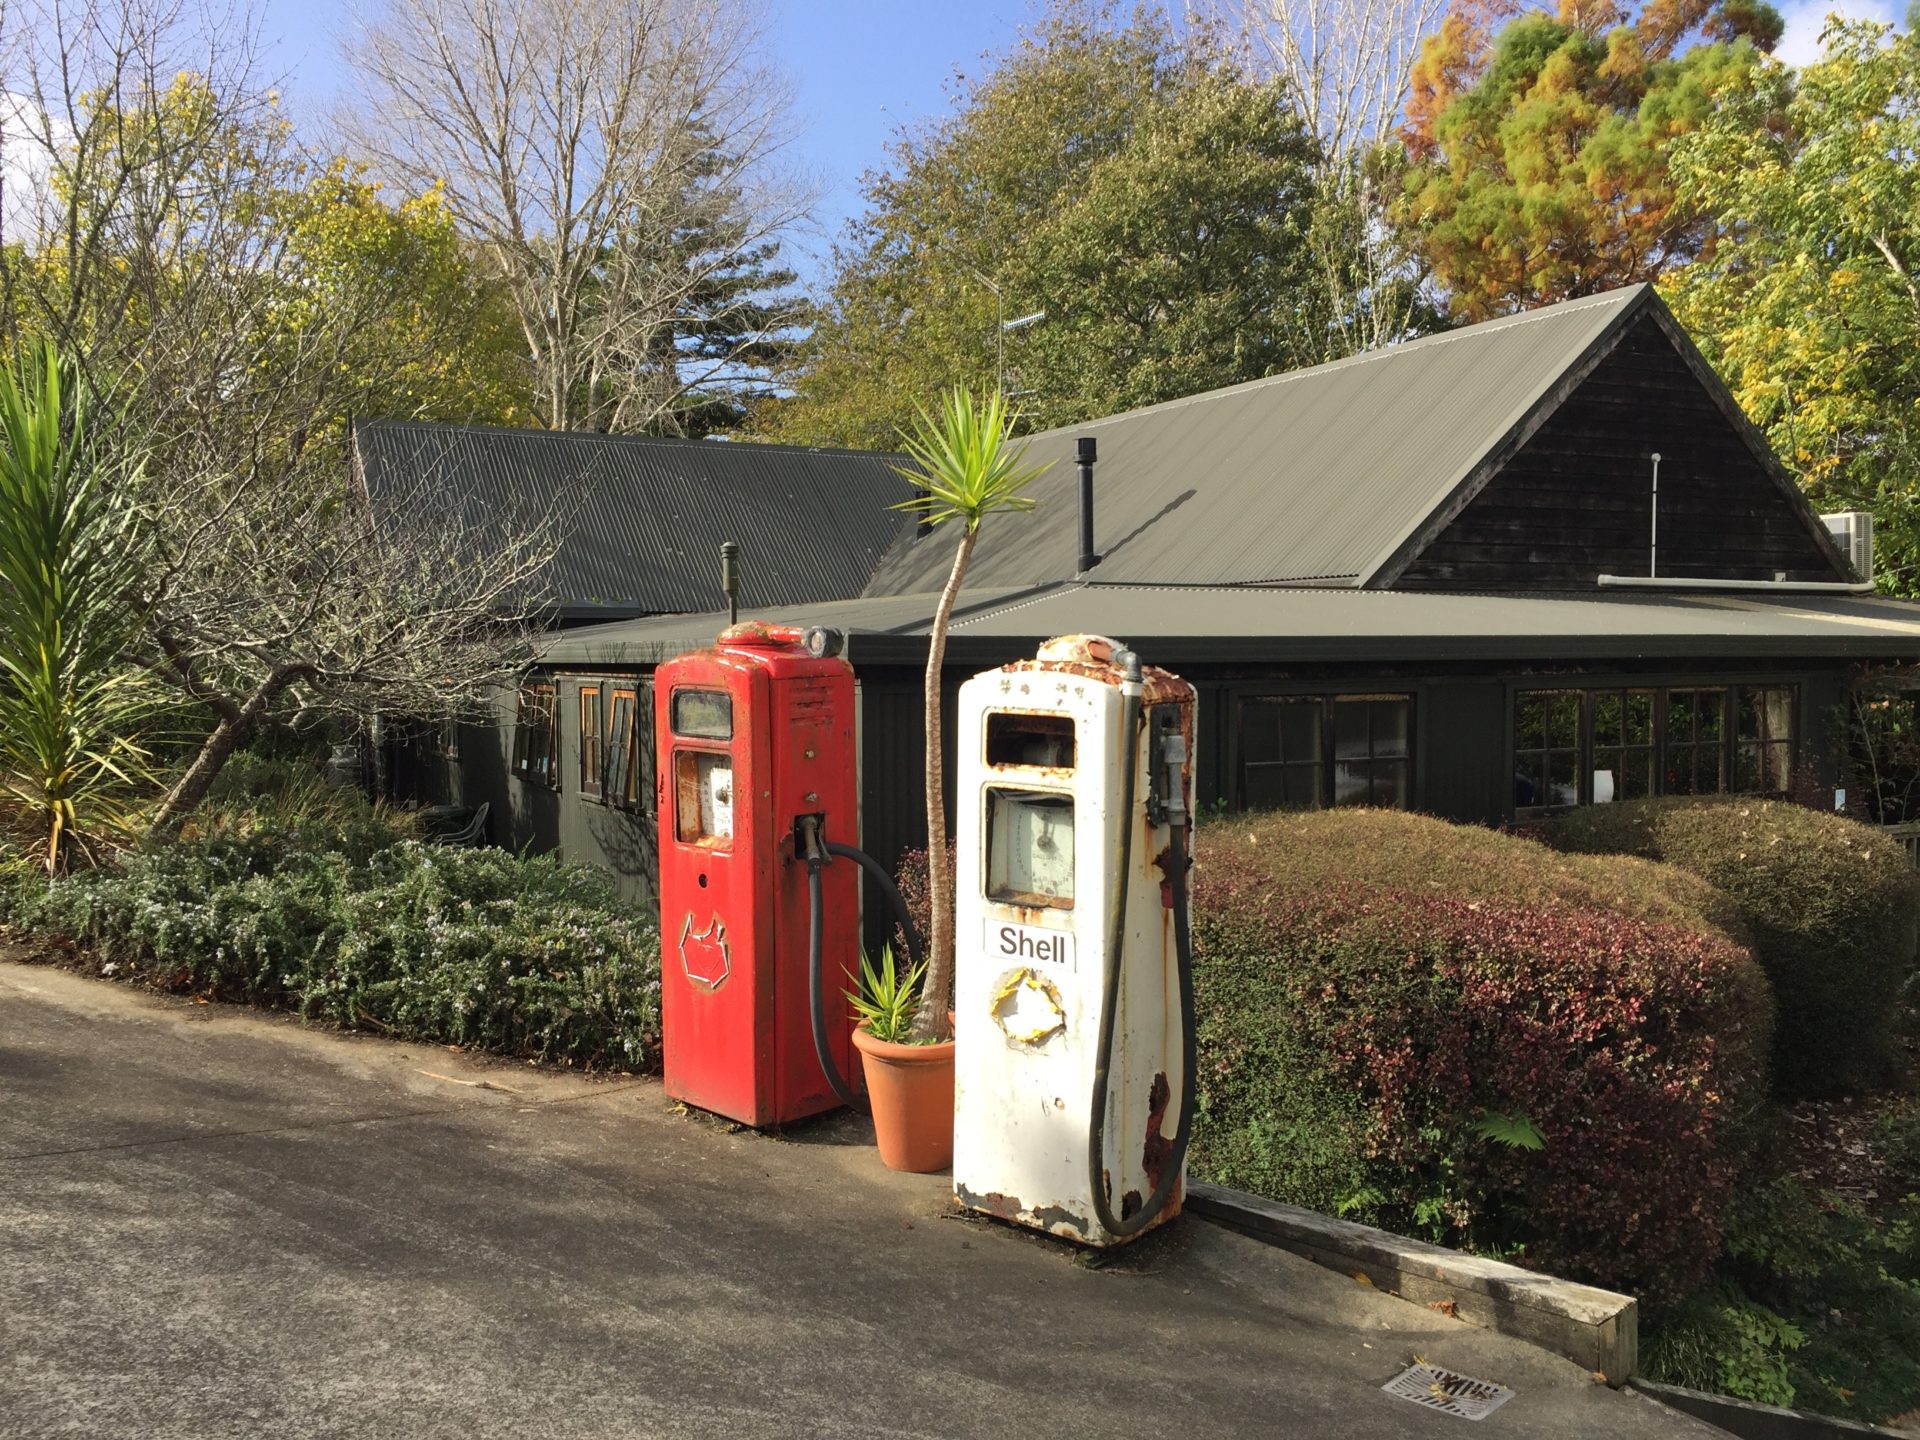 a couple of old gas pumps on a street